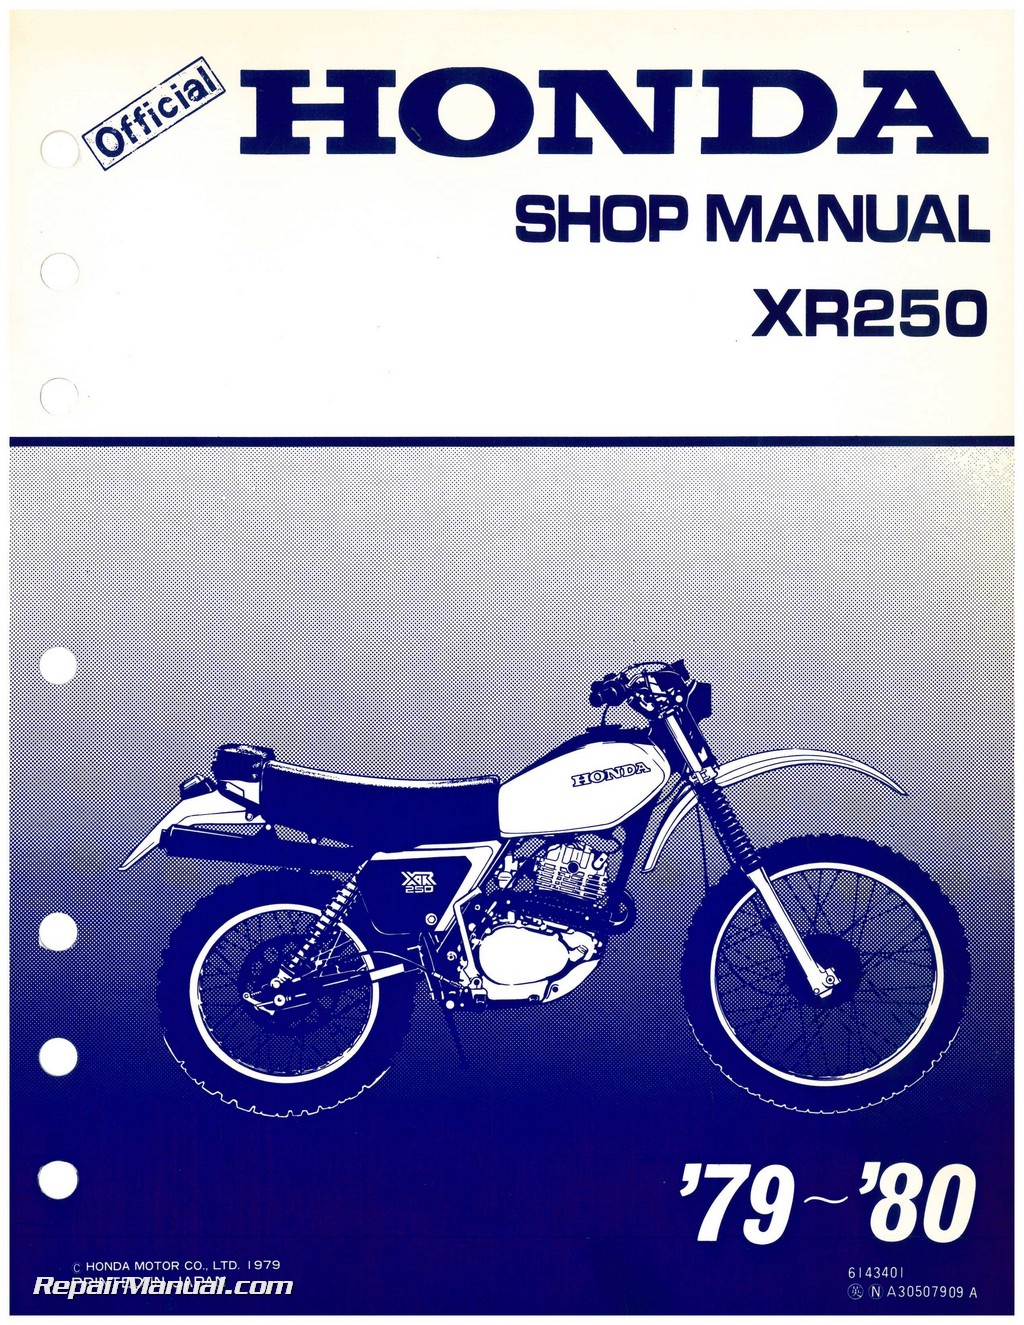 Honda xr 250 for sale philippines